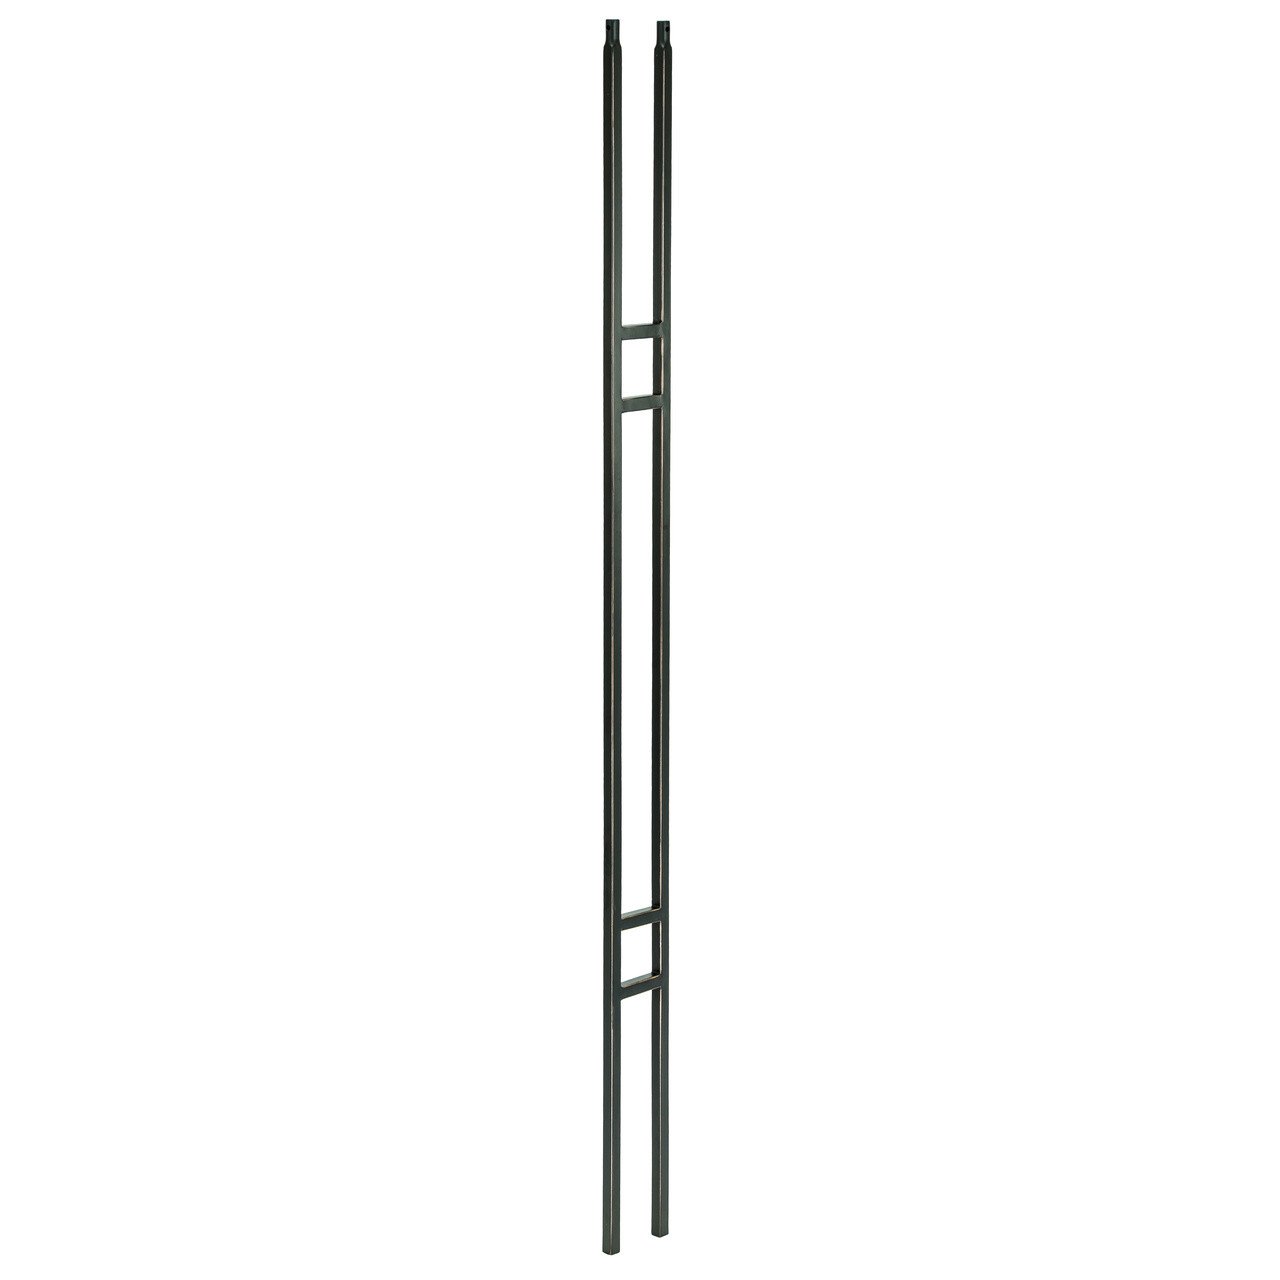 T-19 Double Panel Craftsman Baluster (2)